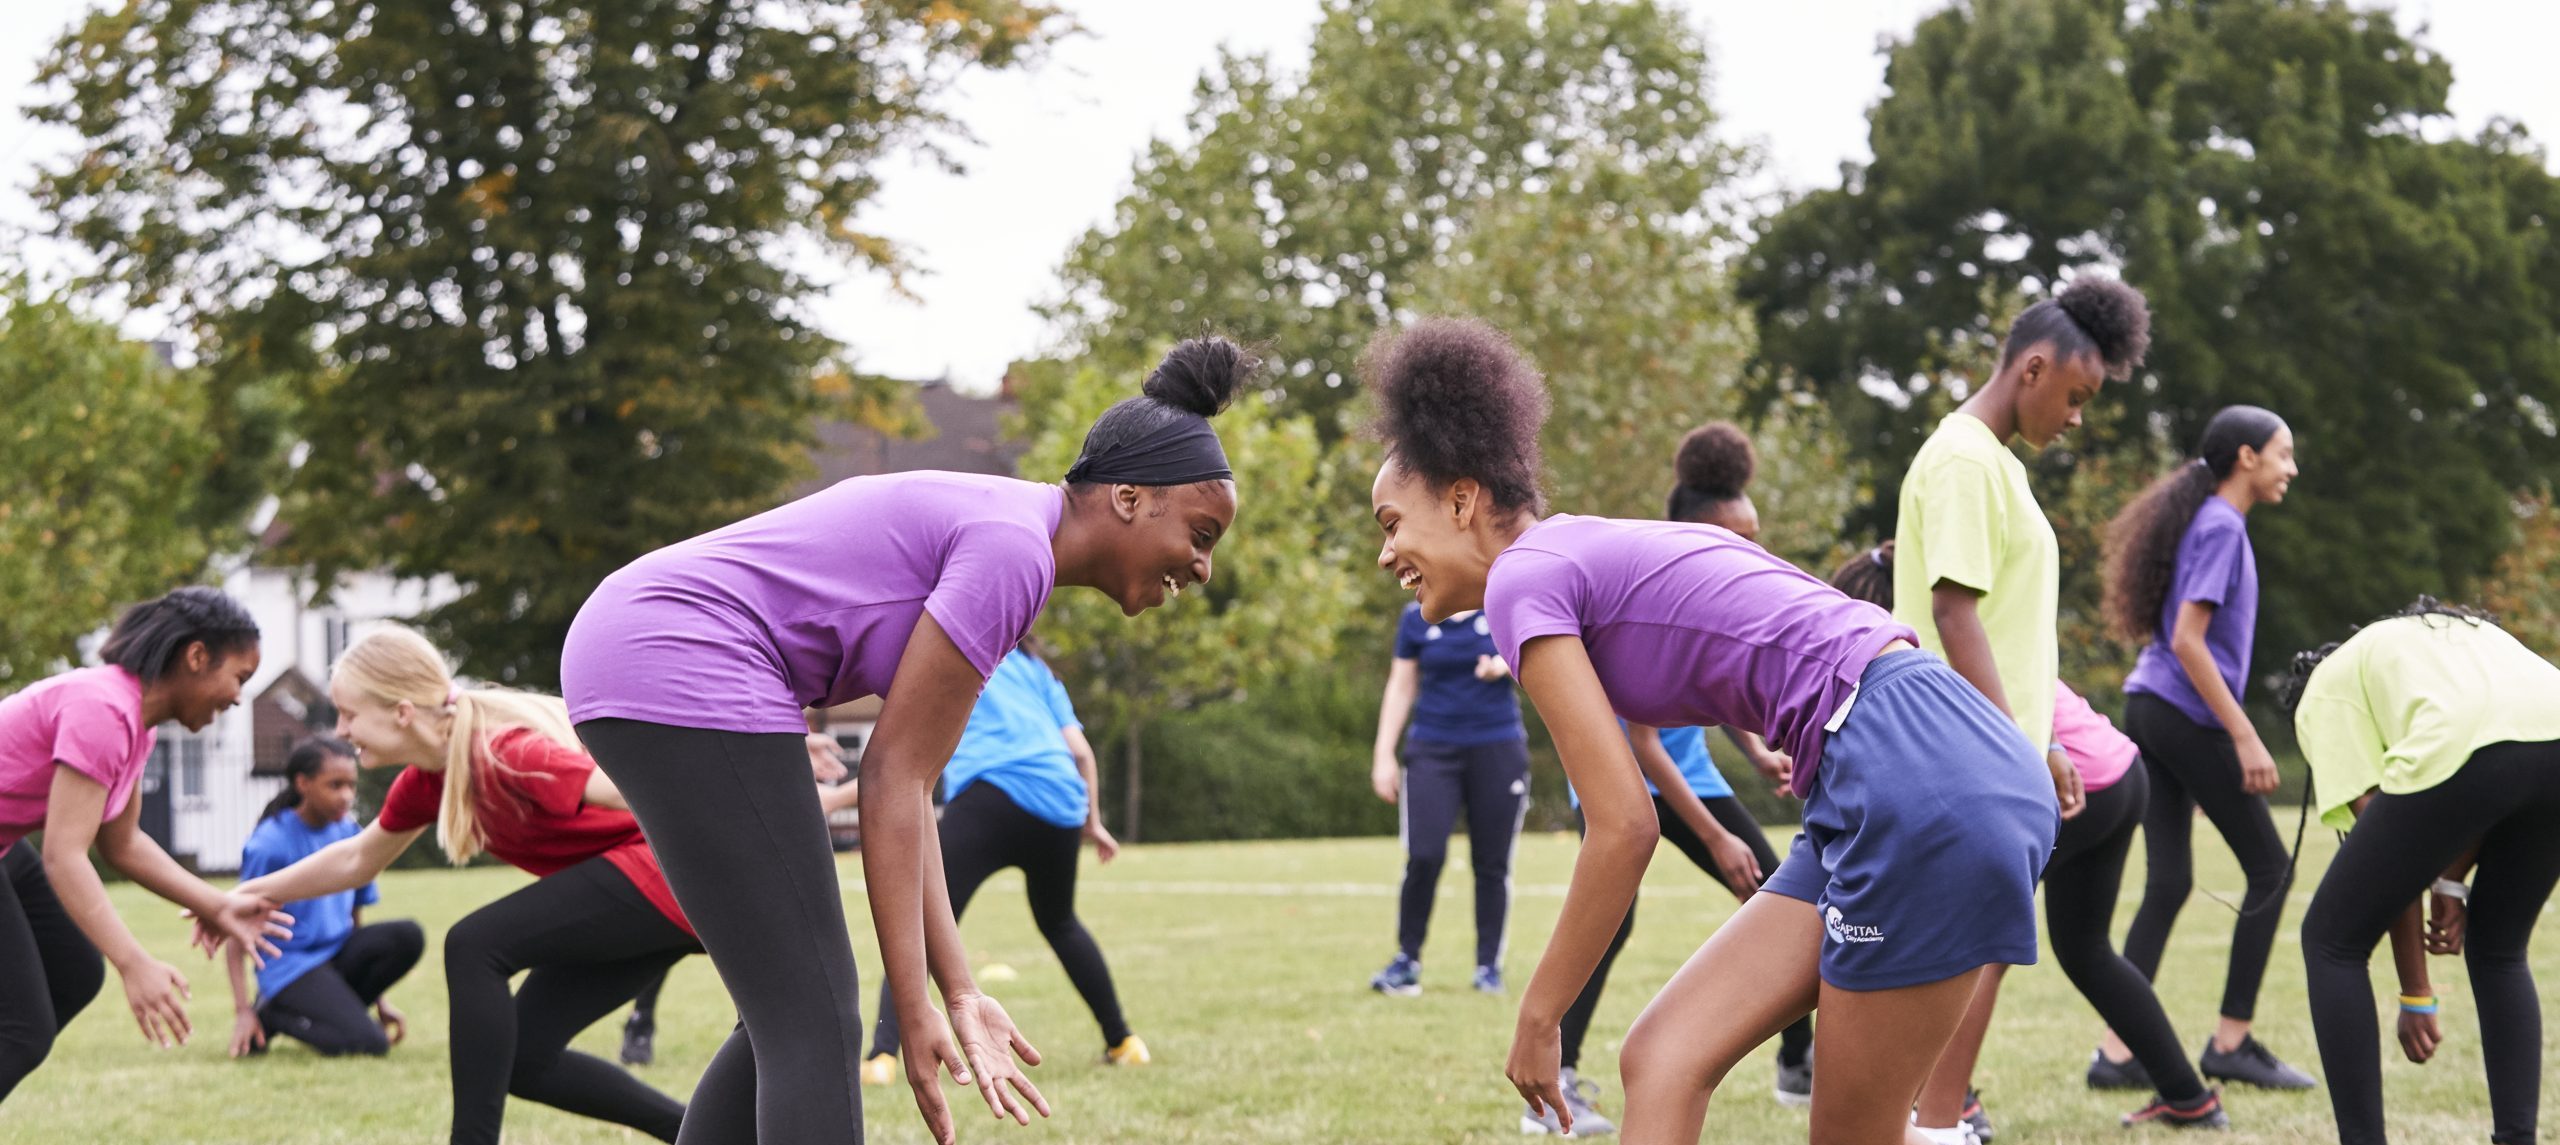 Two black girls playing rugby at school